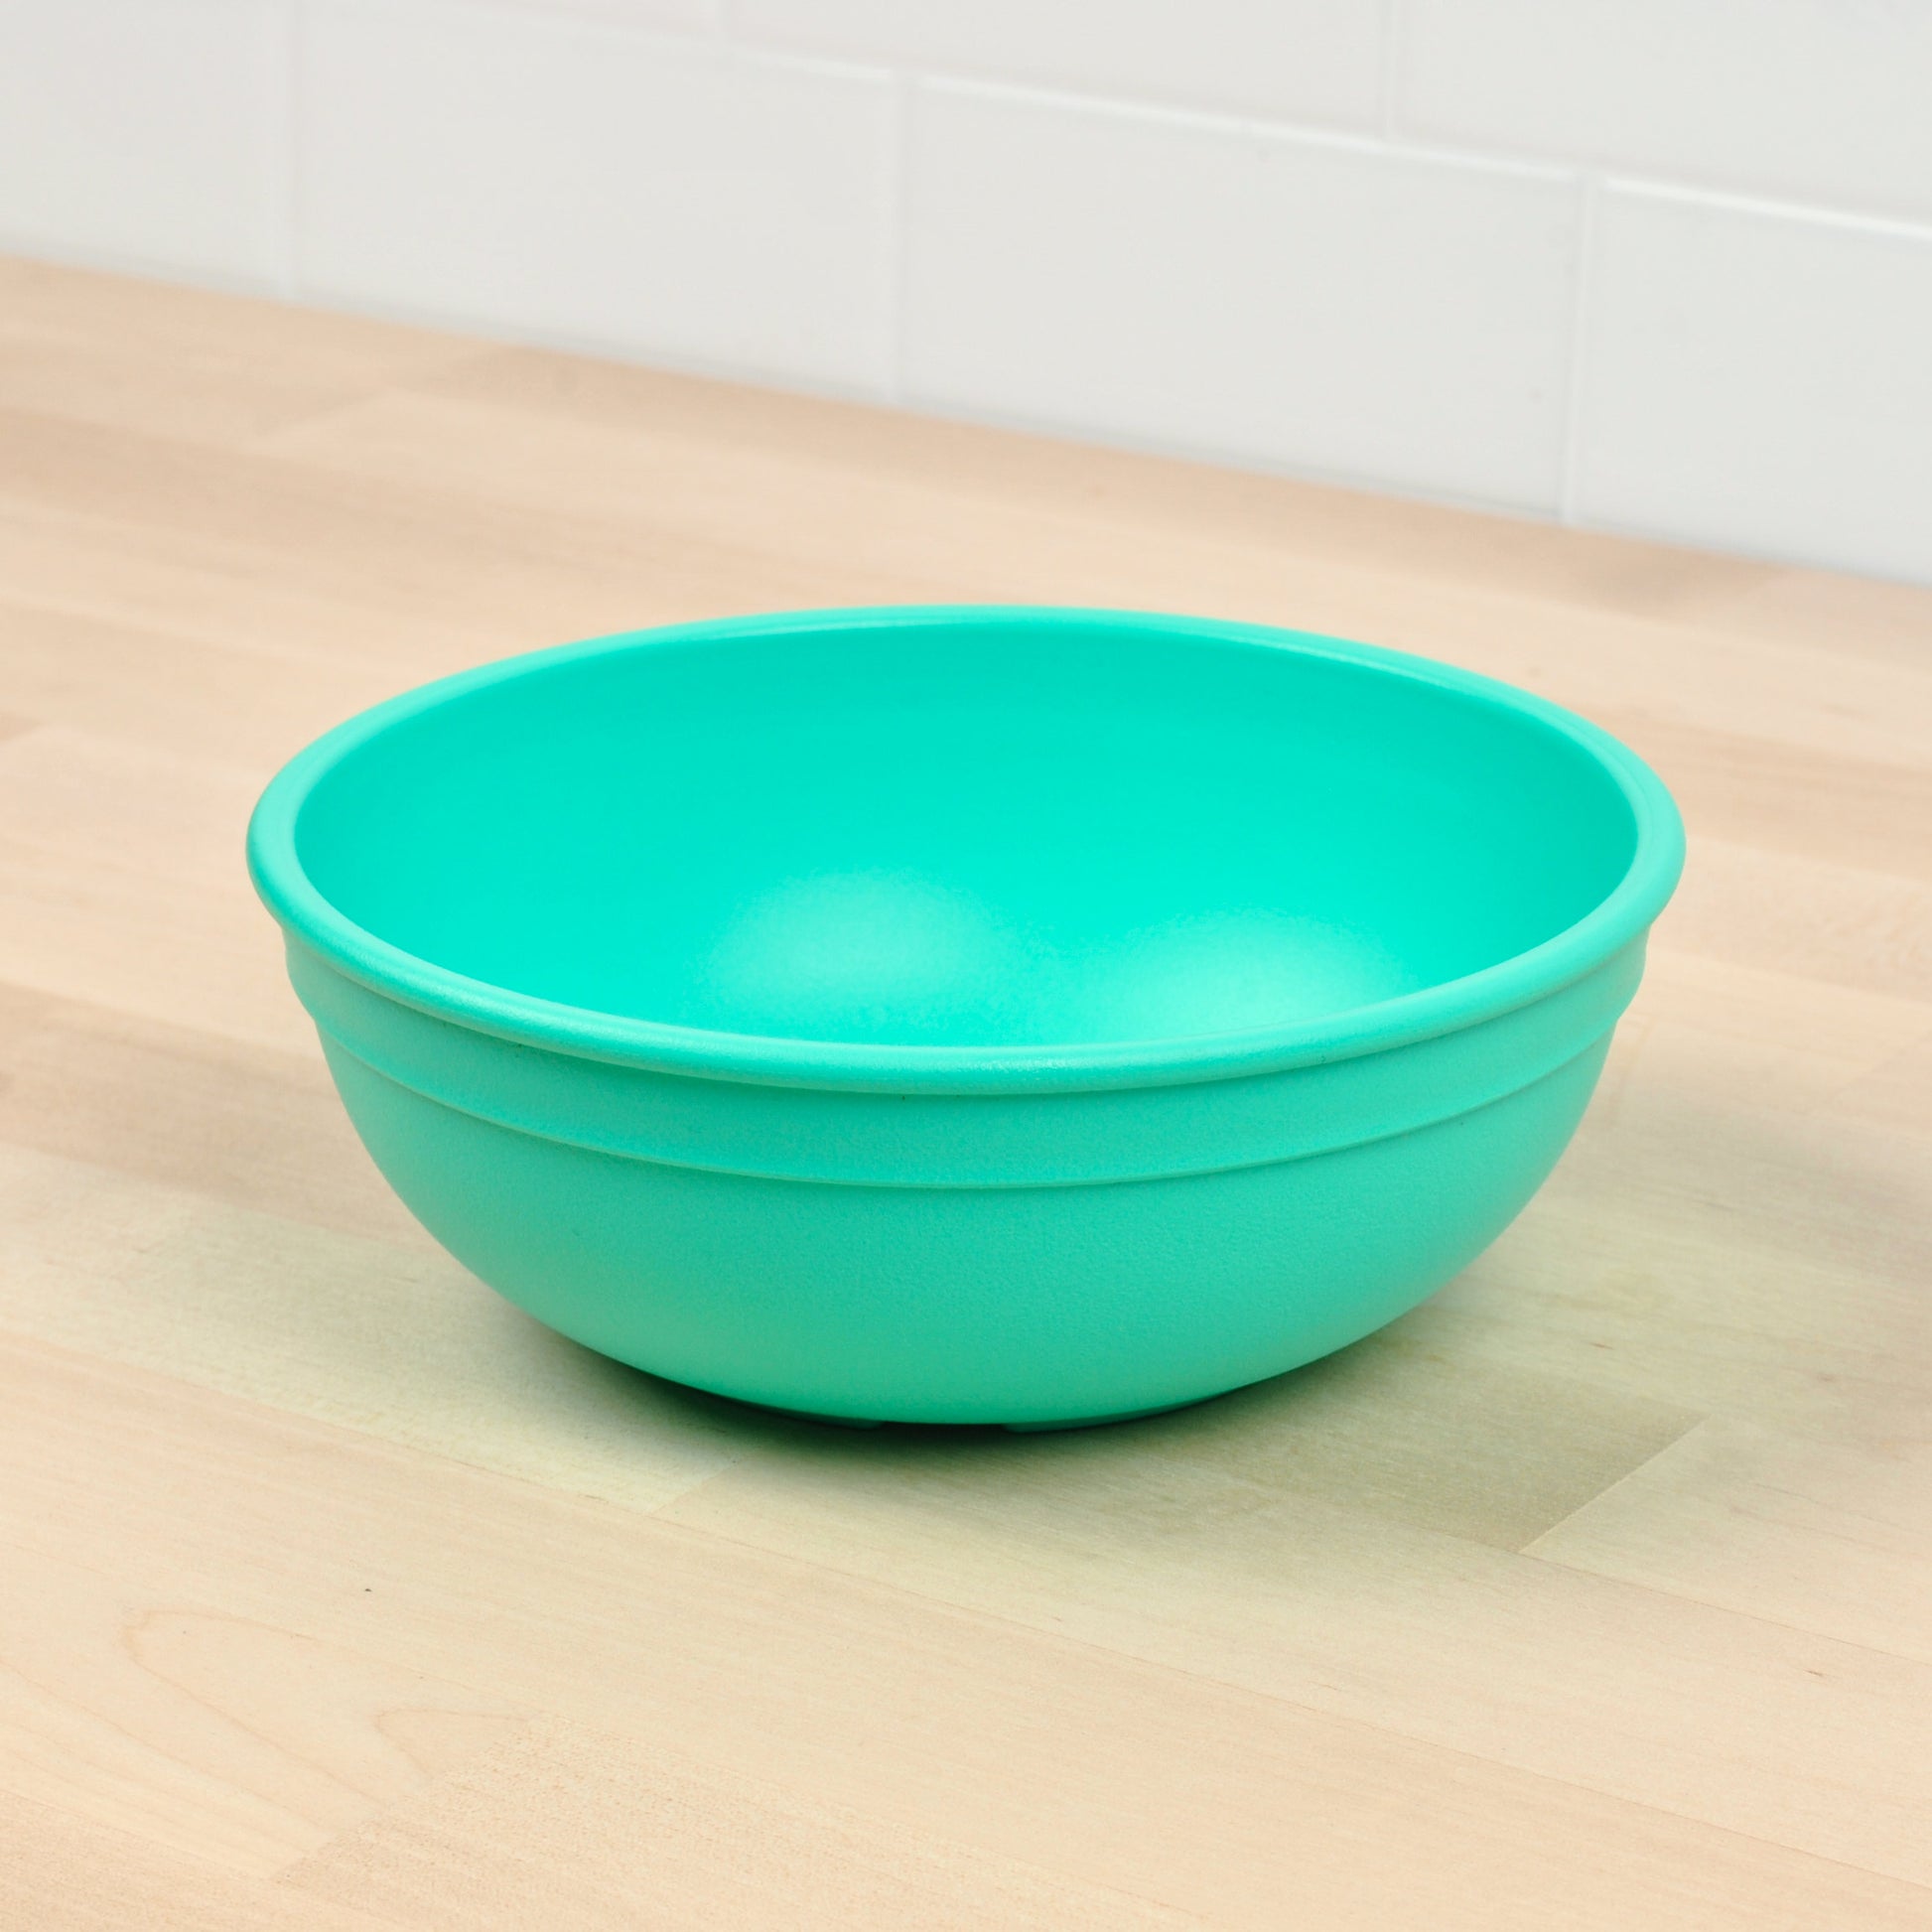 Re-Play Bowl | Aqua Large Size from Bear & Moo